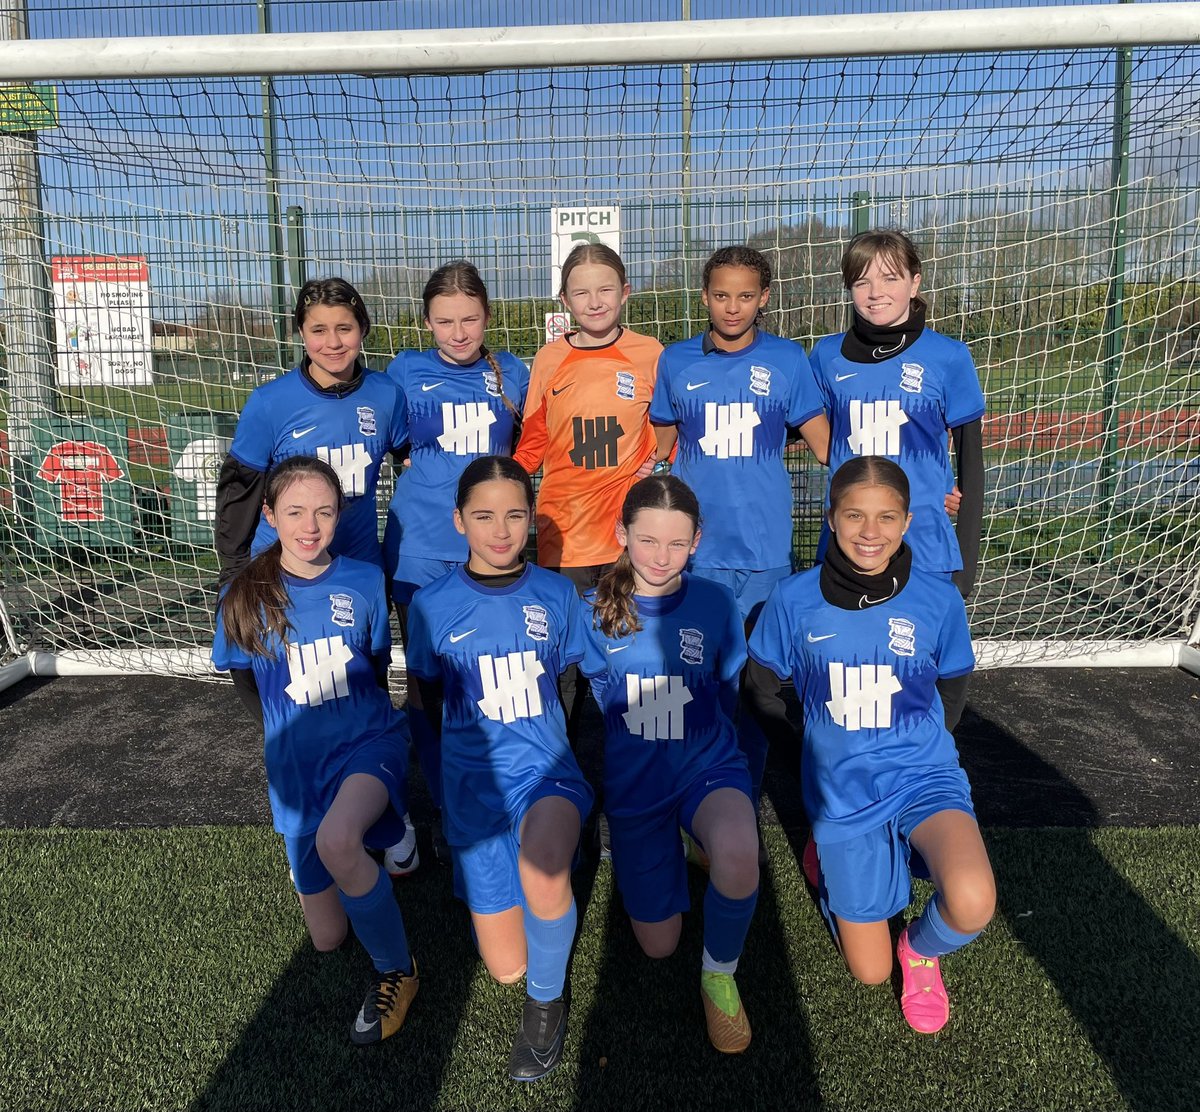 Although disappointed, the Year 8 Girls from @BishopChalloner, representing @BCFCCommunity and @BCFCWomen were a credit to the school and to themselves today at the @EFL Girls Cup Regional Finals. Gave it absolutely everything and managed to reach the Semi Finals 💪🏻⚽️🔵